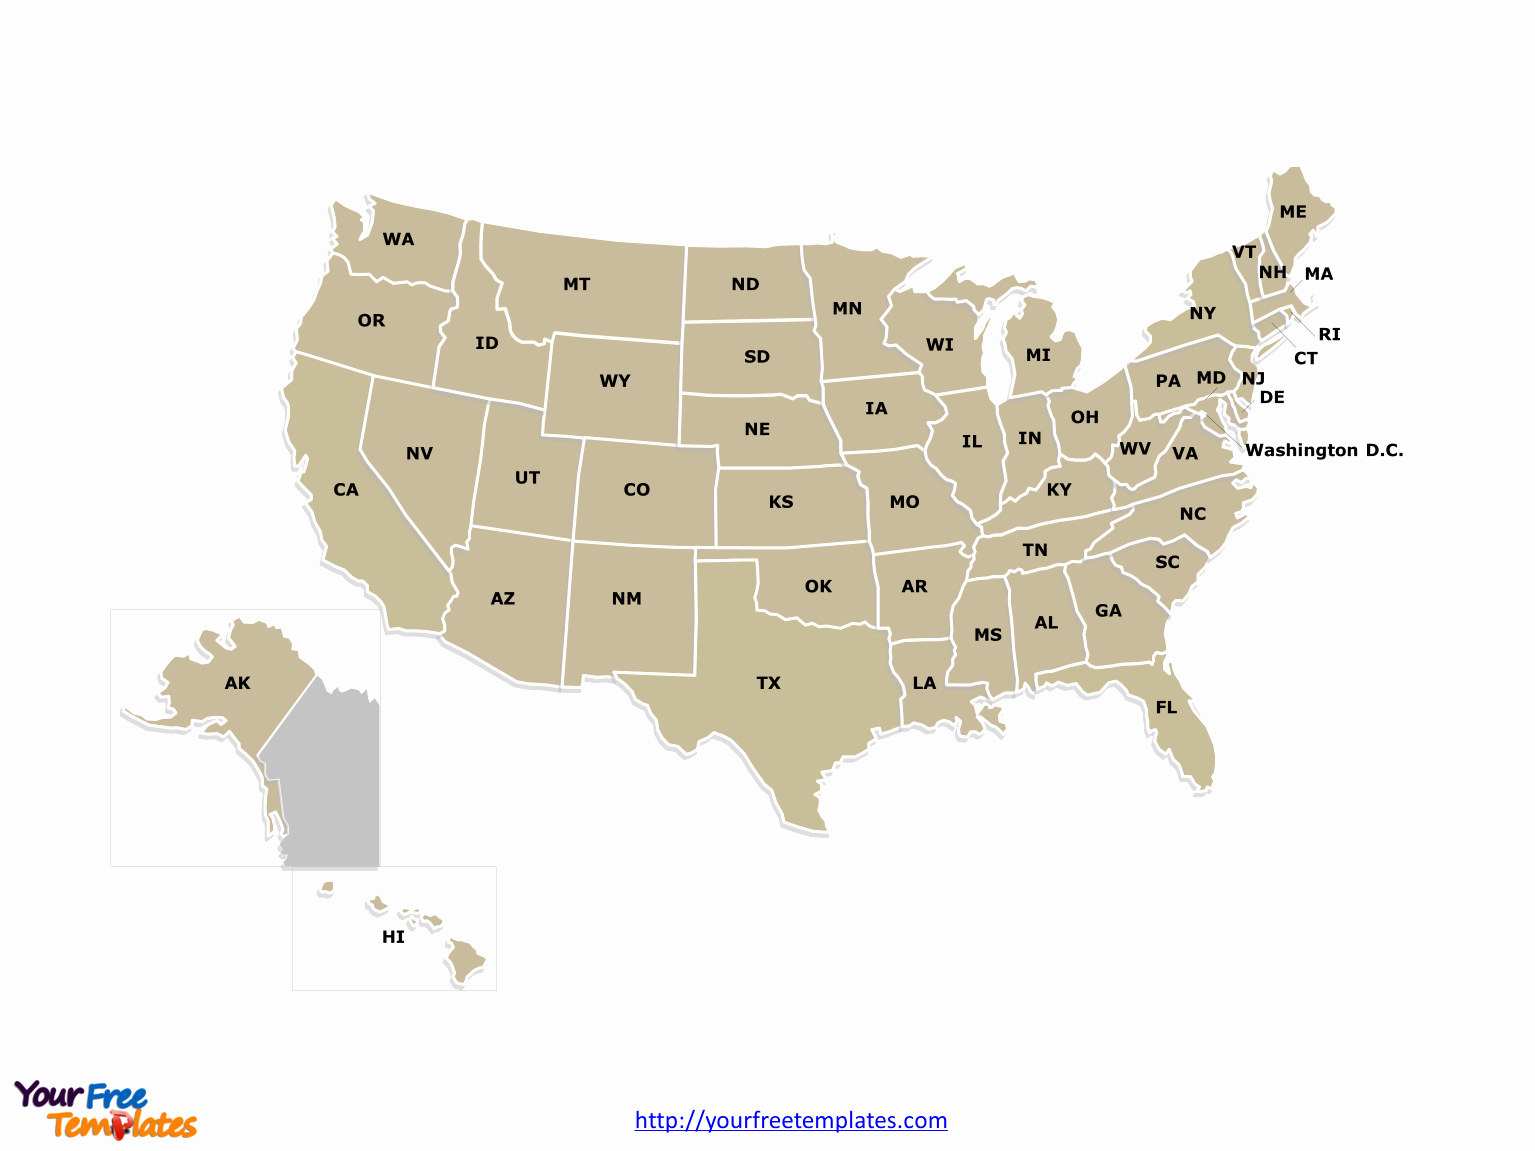 Interactive Us Maps for Powerpoint Beautiful Free Usa Powerpoint Map Free Powerpoint Templates